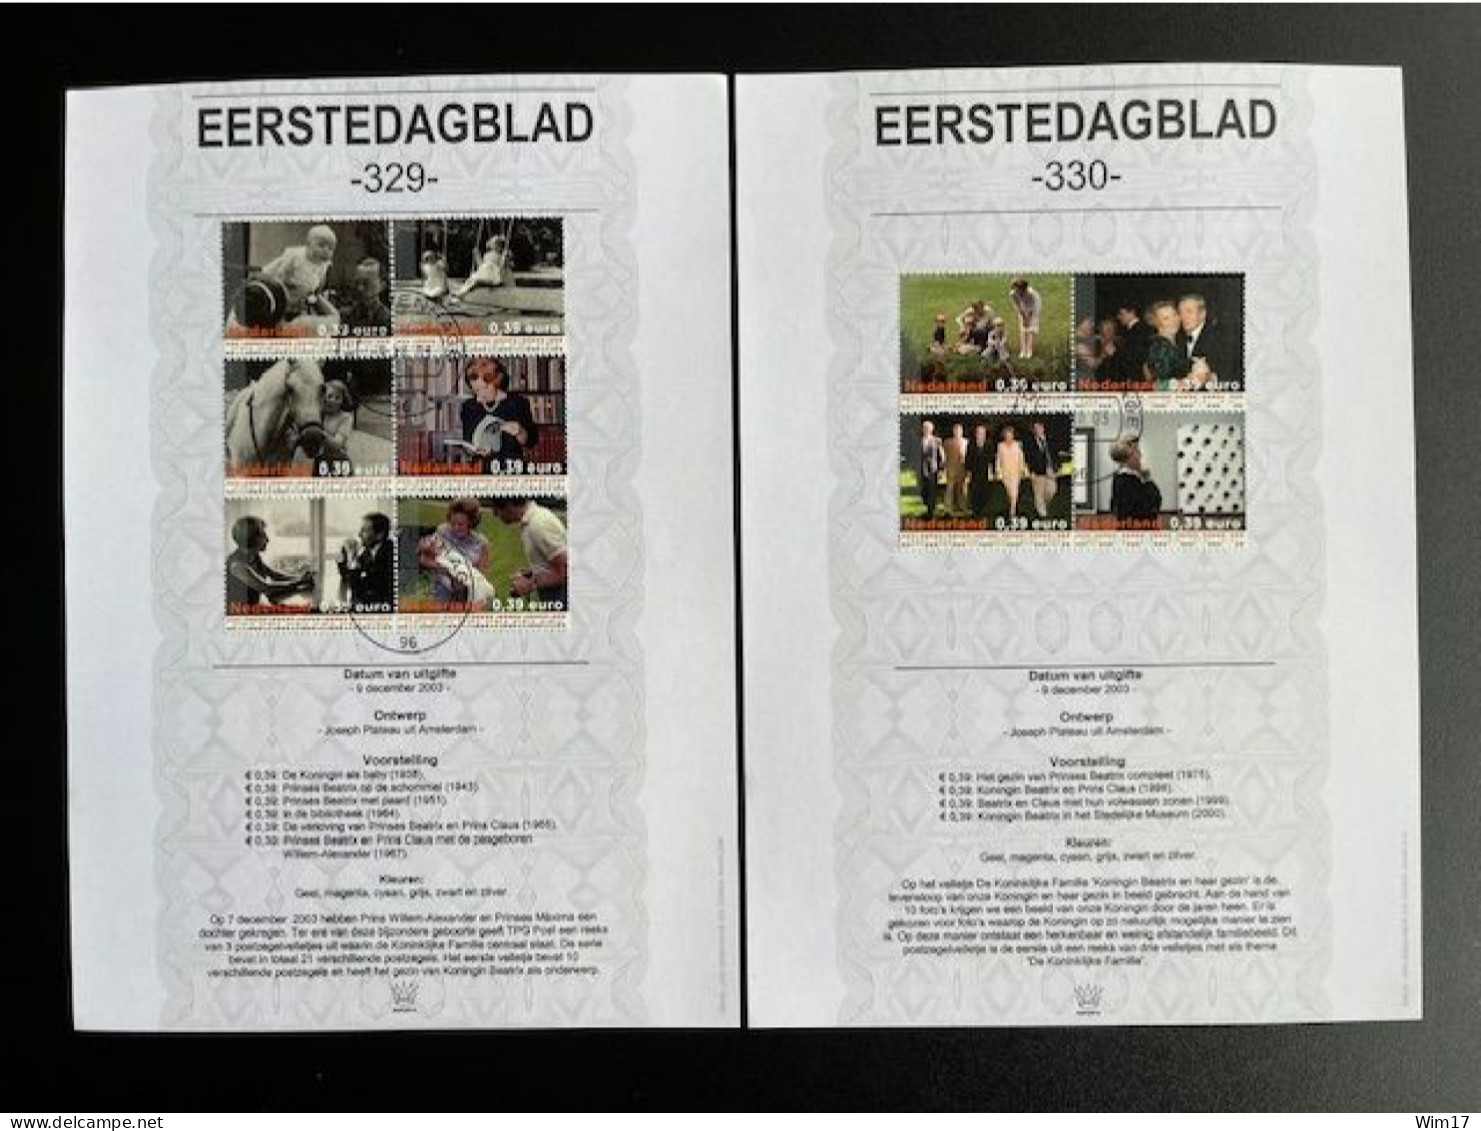 NETHERLANDS 2003 FIRST DAY CARD ROYAL FAMILY NEDERLAND EDB IMPORTA 329/30  EERSTEDAGBLAD - Covers & Documents